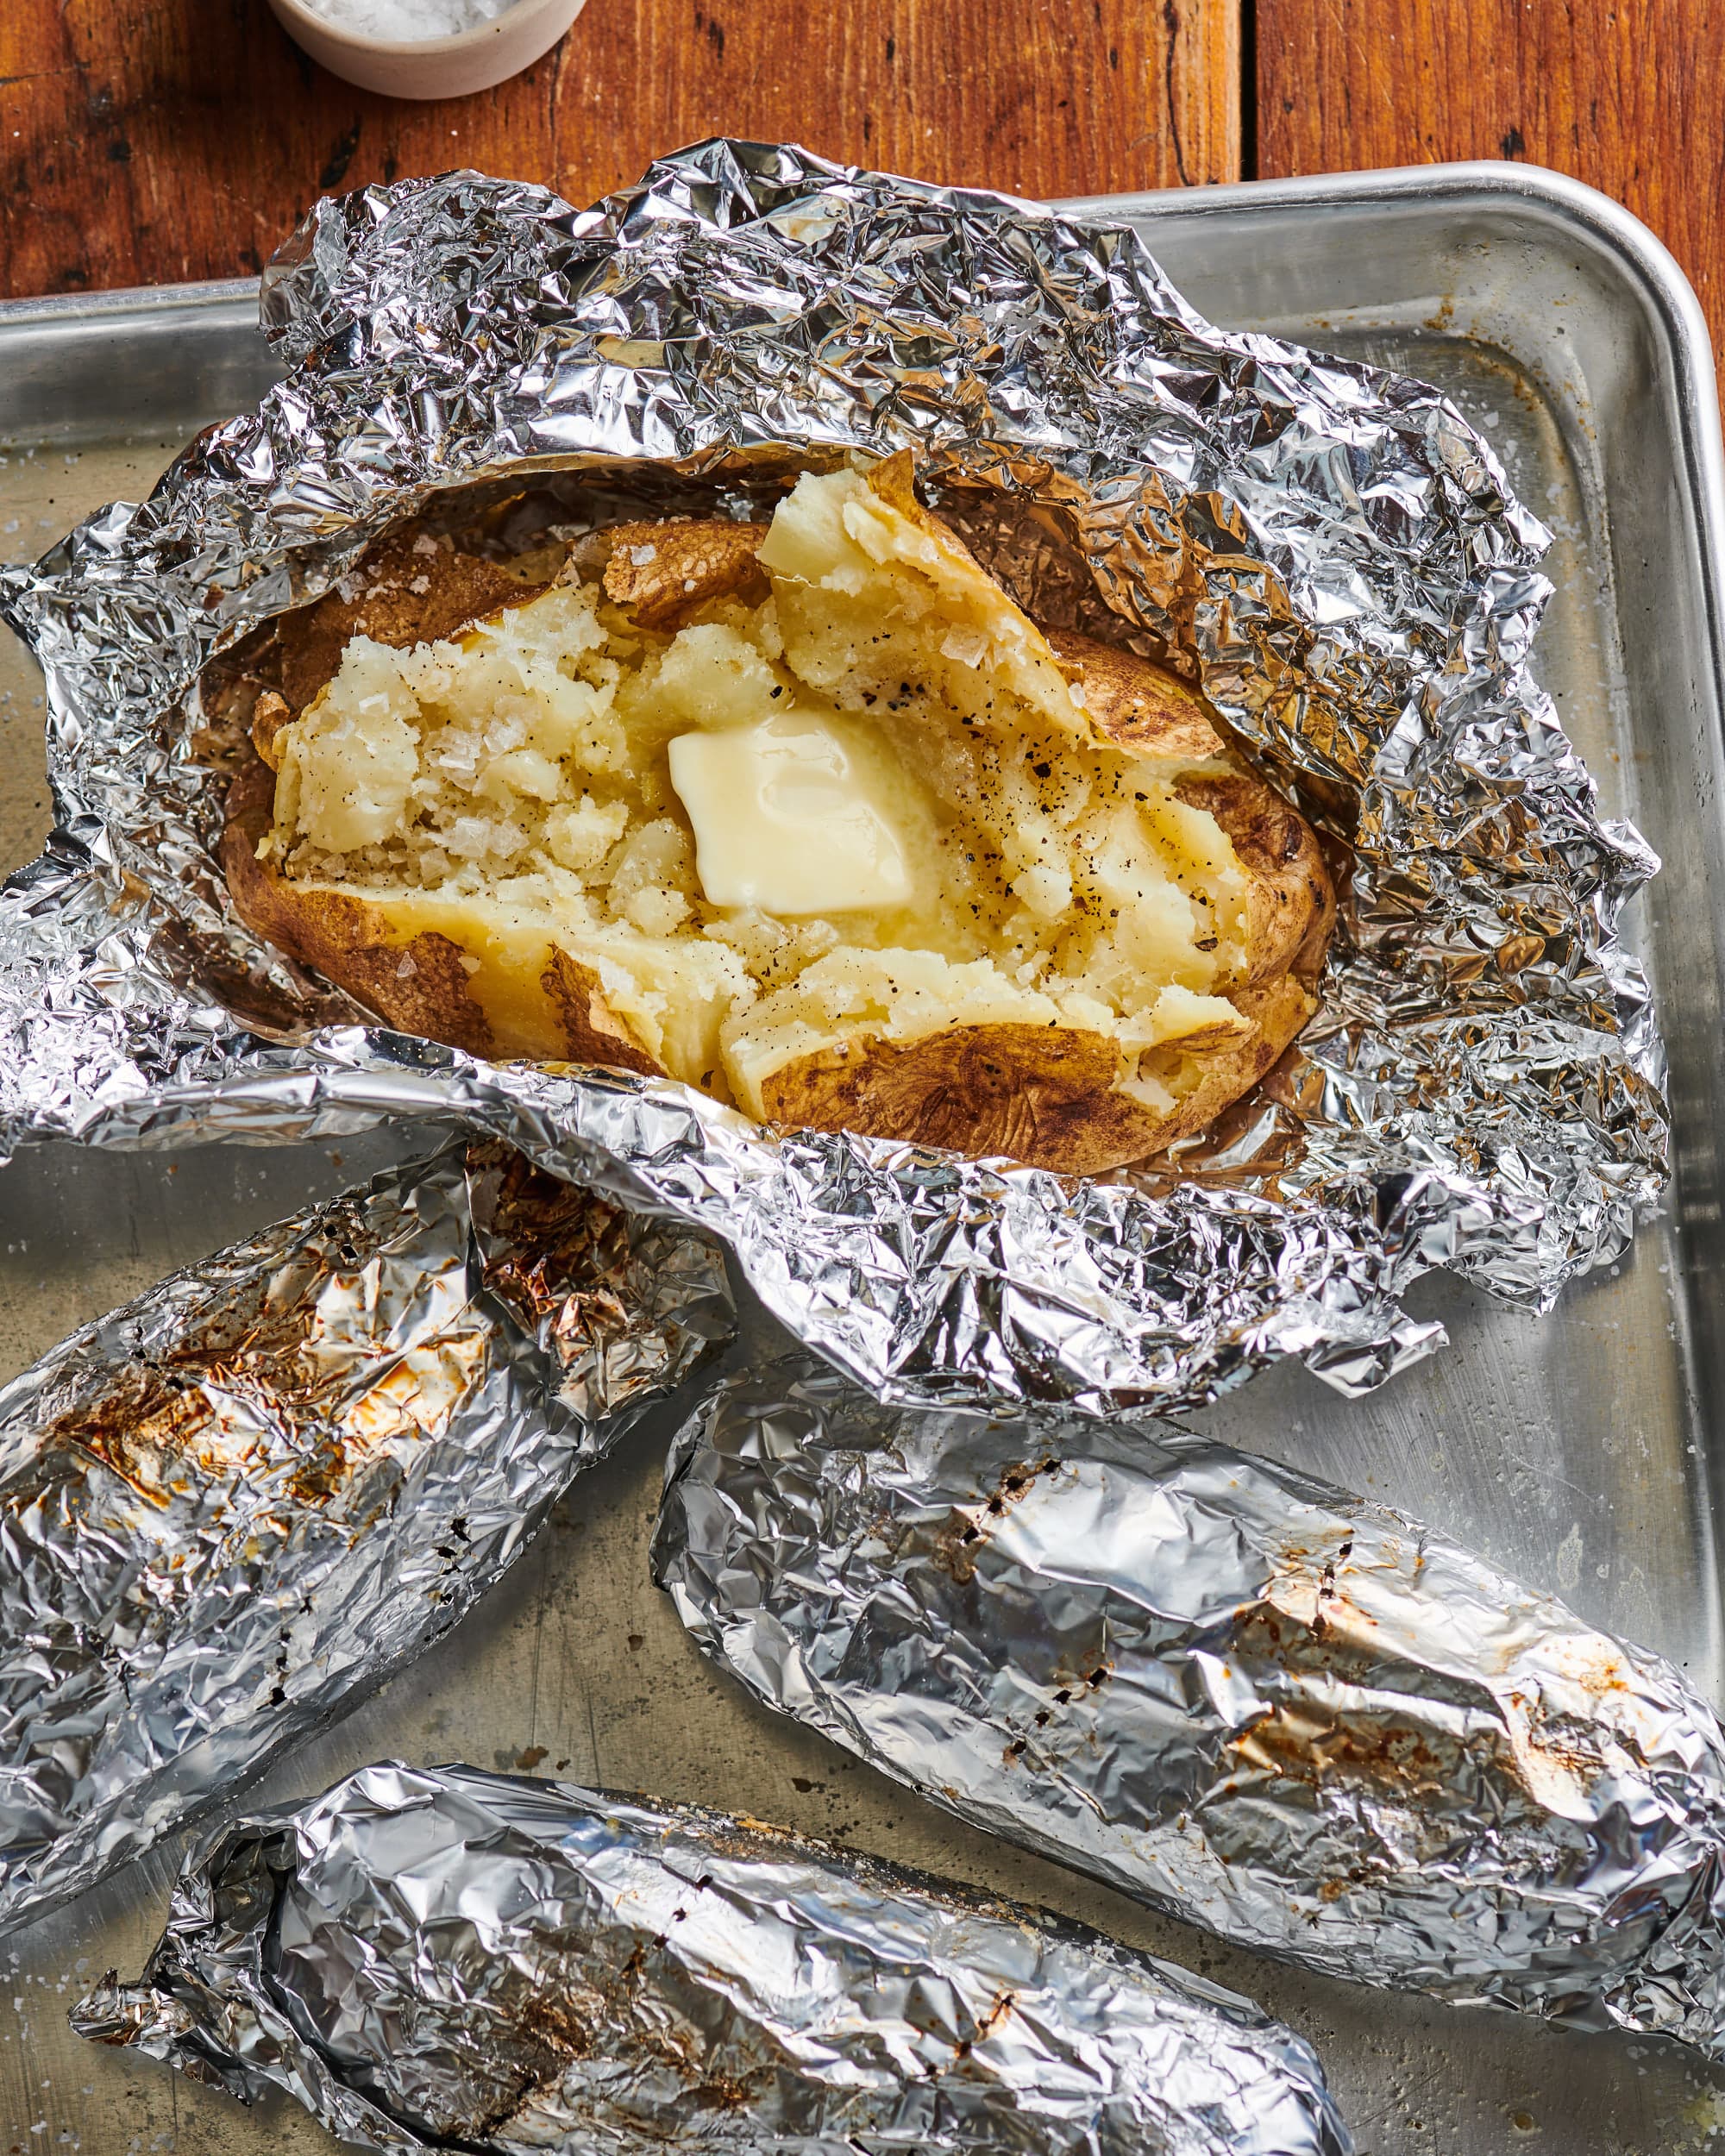 https://cdn.apartmenttherapy.info/image/upload/v1588366720/k/Photo/Recipes/2020-05-How-To-Grill-a-Baked-Potato/HT-Grill-a-Baked-Potato447.jpg